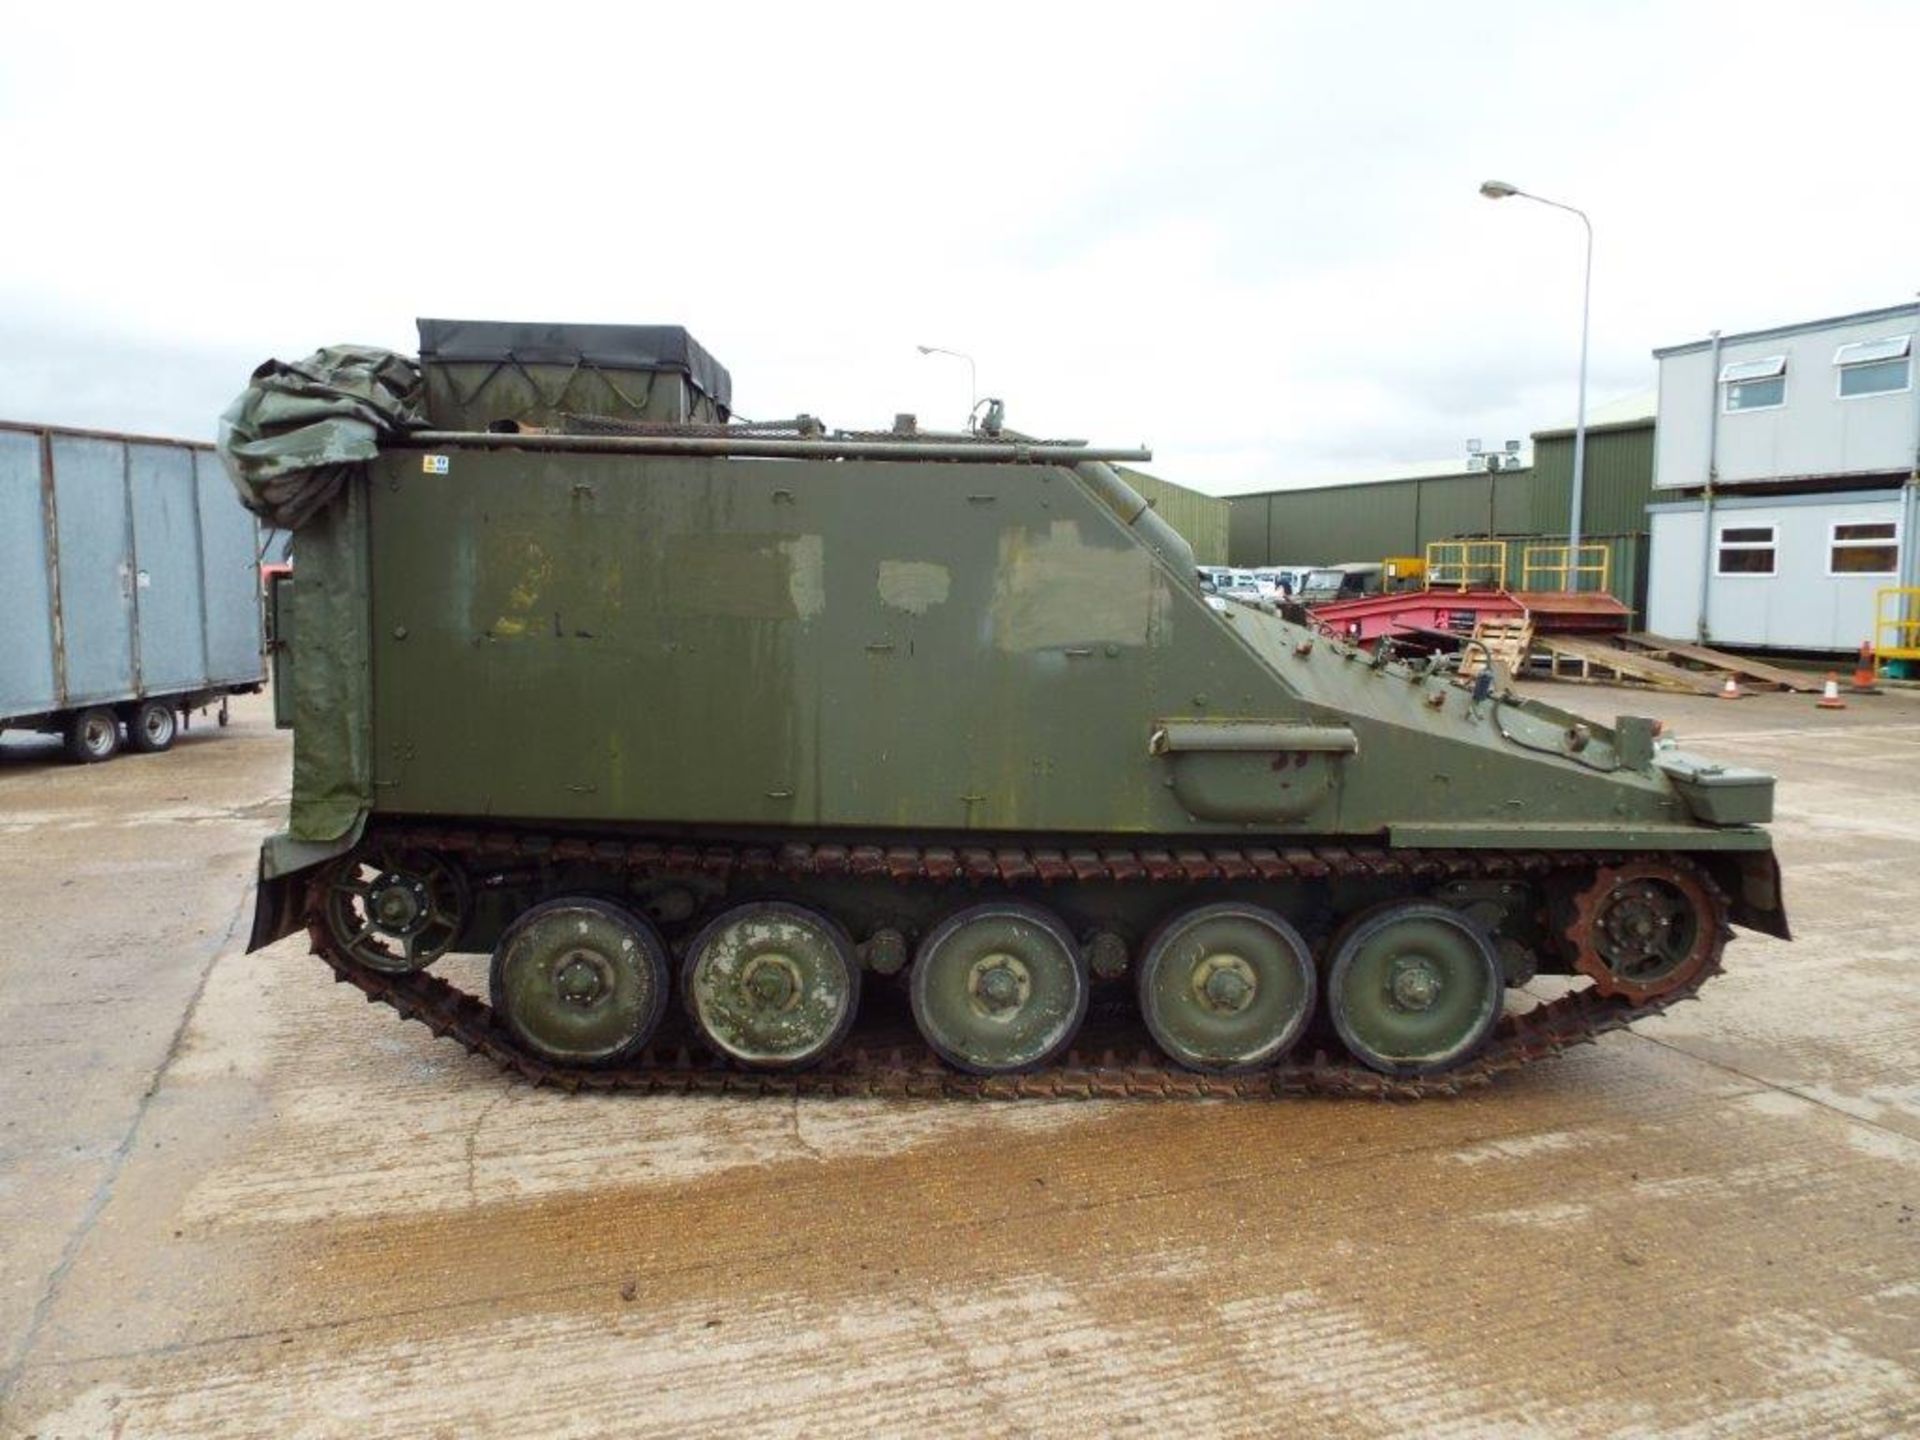 CVRT (Combat Vehicle Reconnaissance Tracked) FV105 Sultan Armoured Personnel Carrier - Image 8 of 32